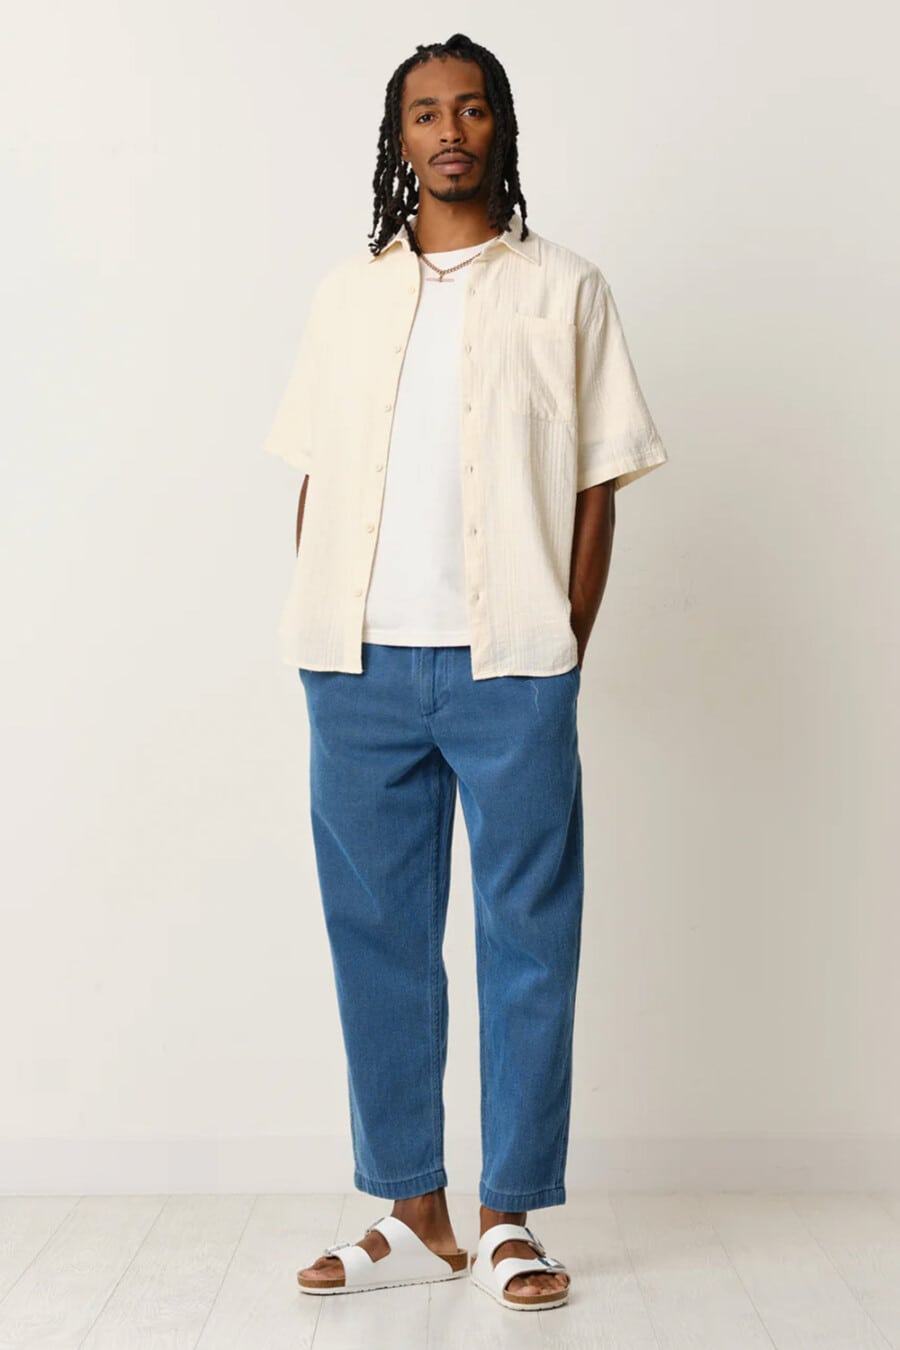 Men's cropped mid blue chinos, white T-shirt, cream short-sleeve shirt and white leather slider sandals outfit